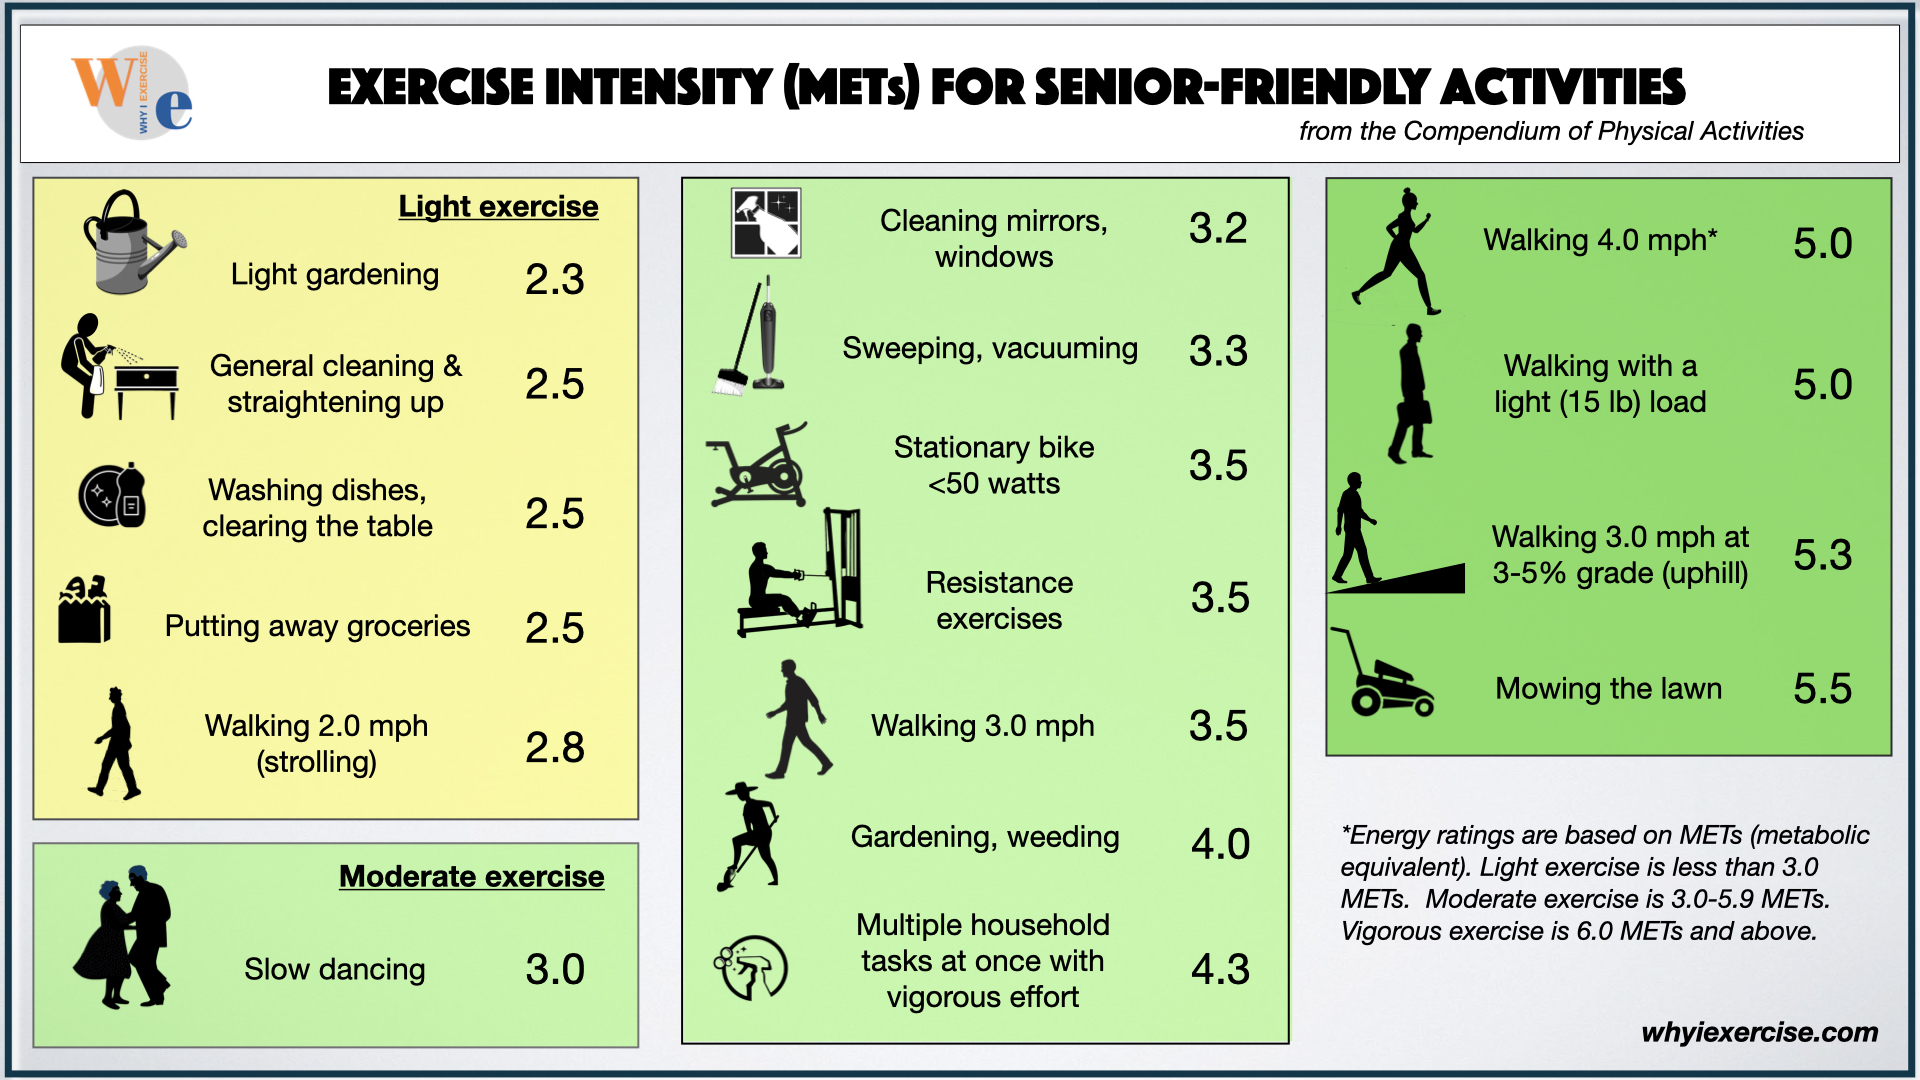 comparison of METs for senior-friendly exercise